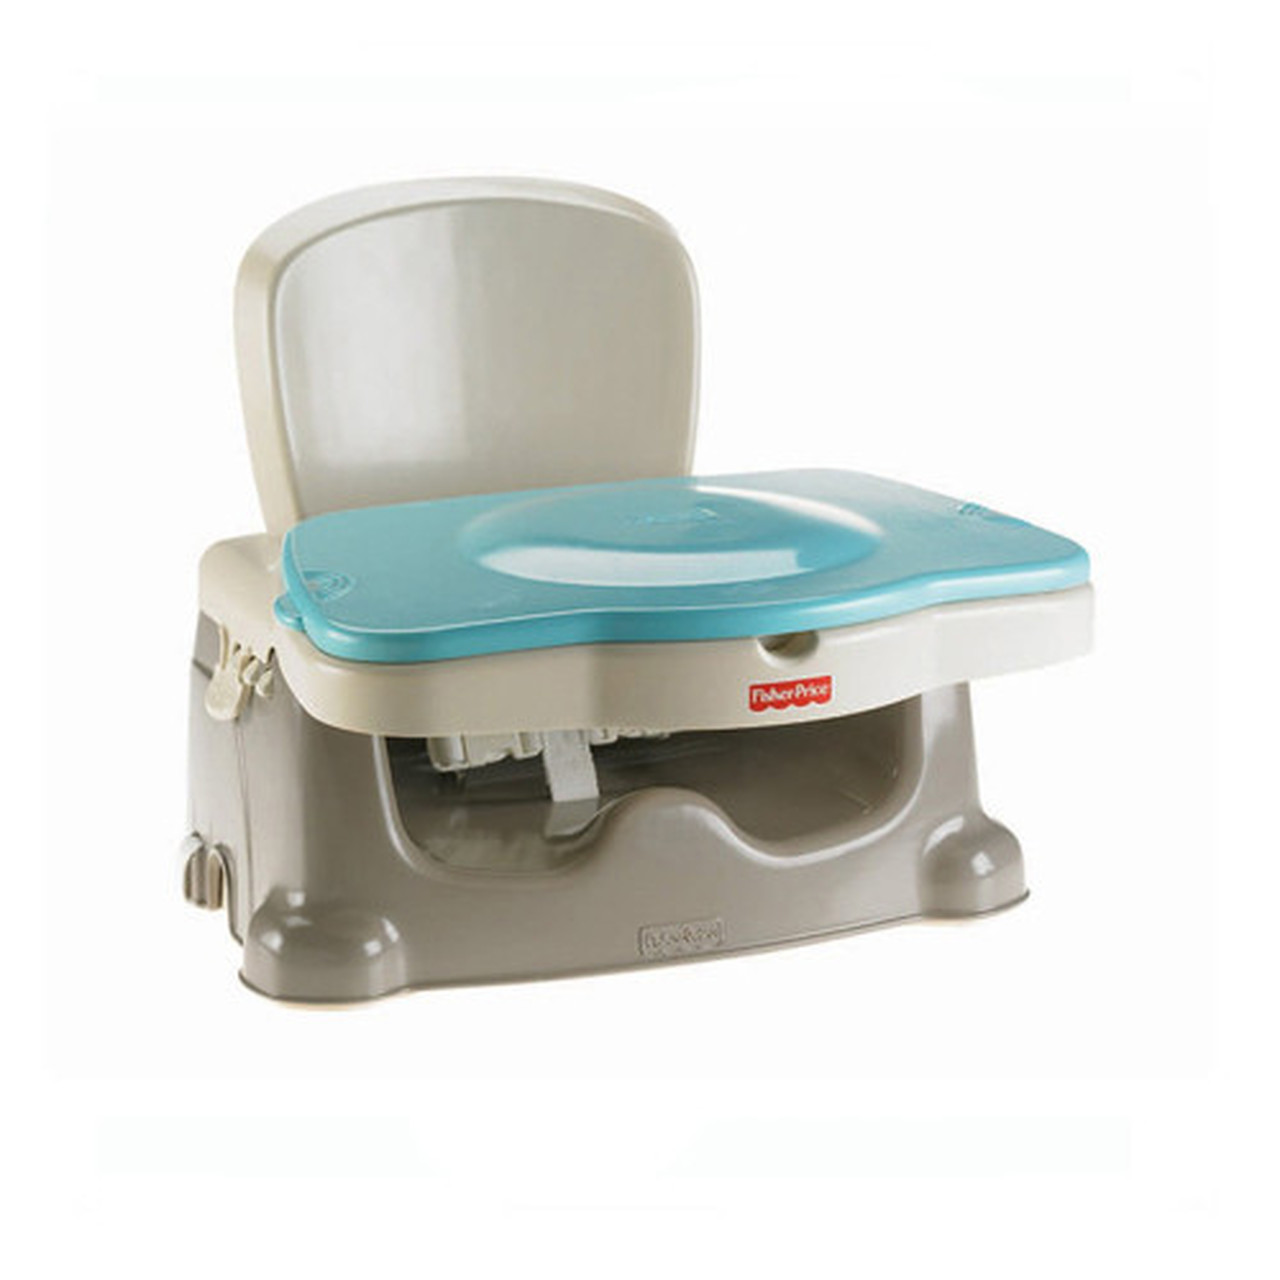 Infant to Toddler to Big Kid Scale with Removable Tray